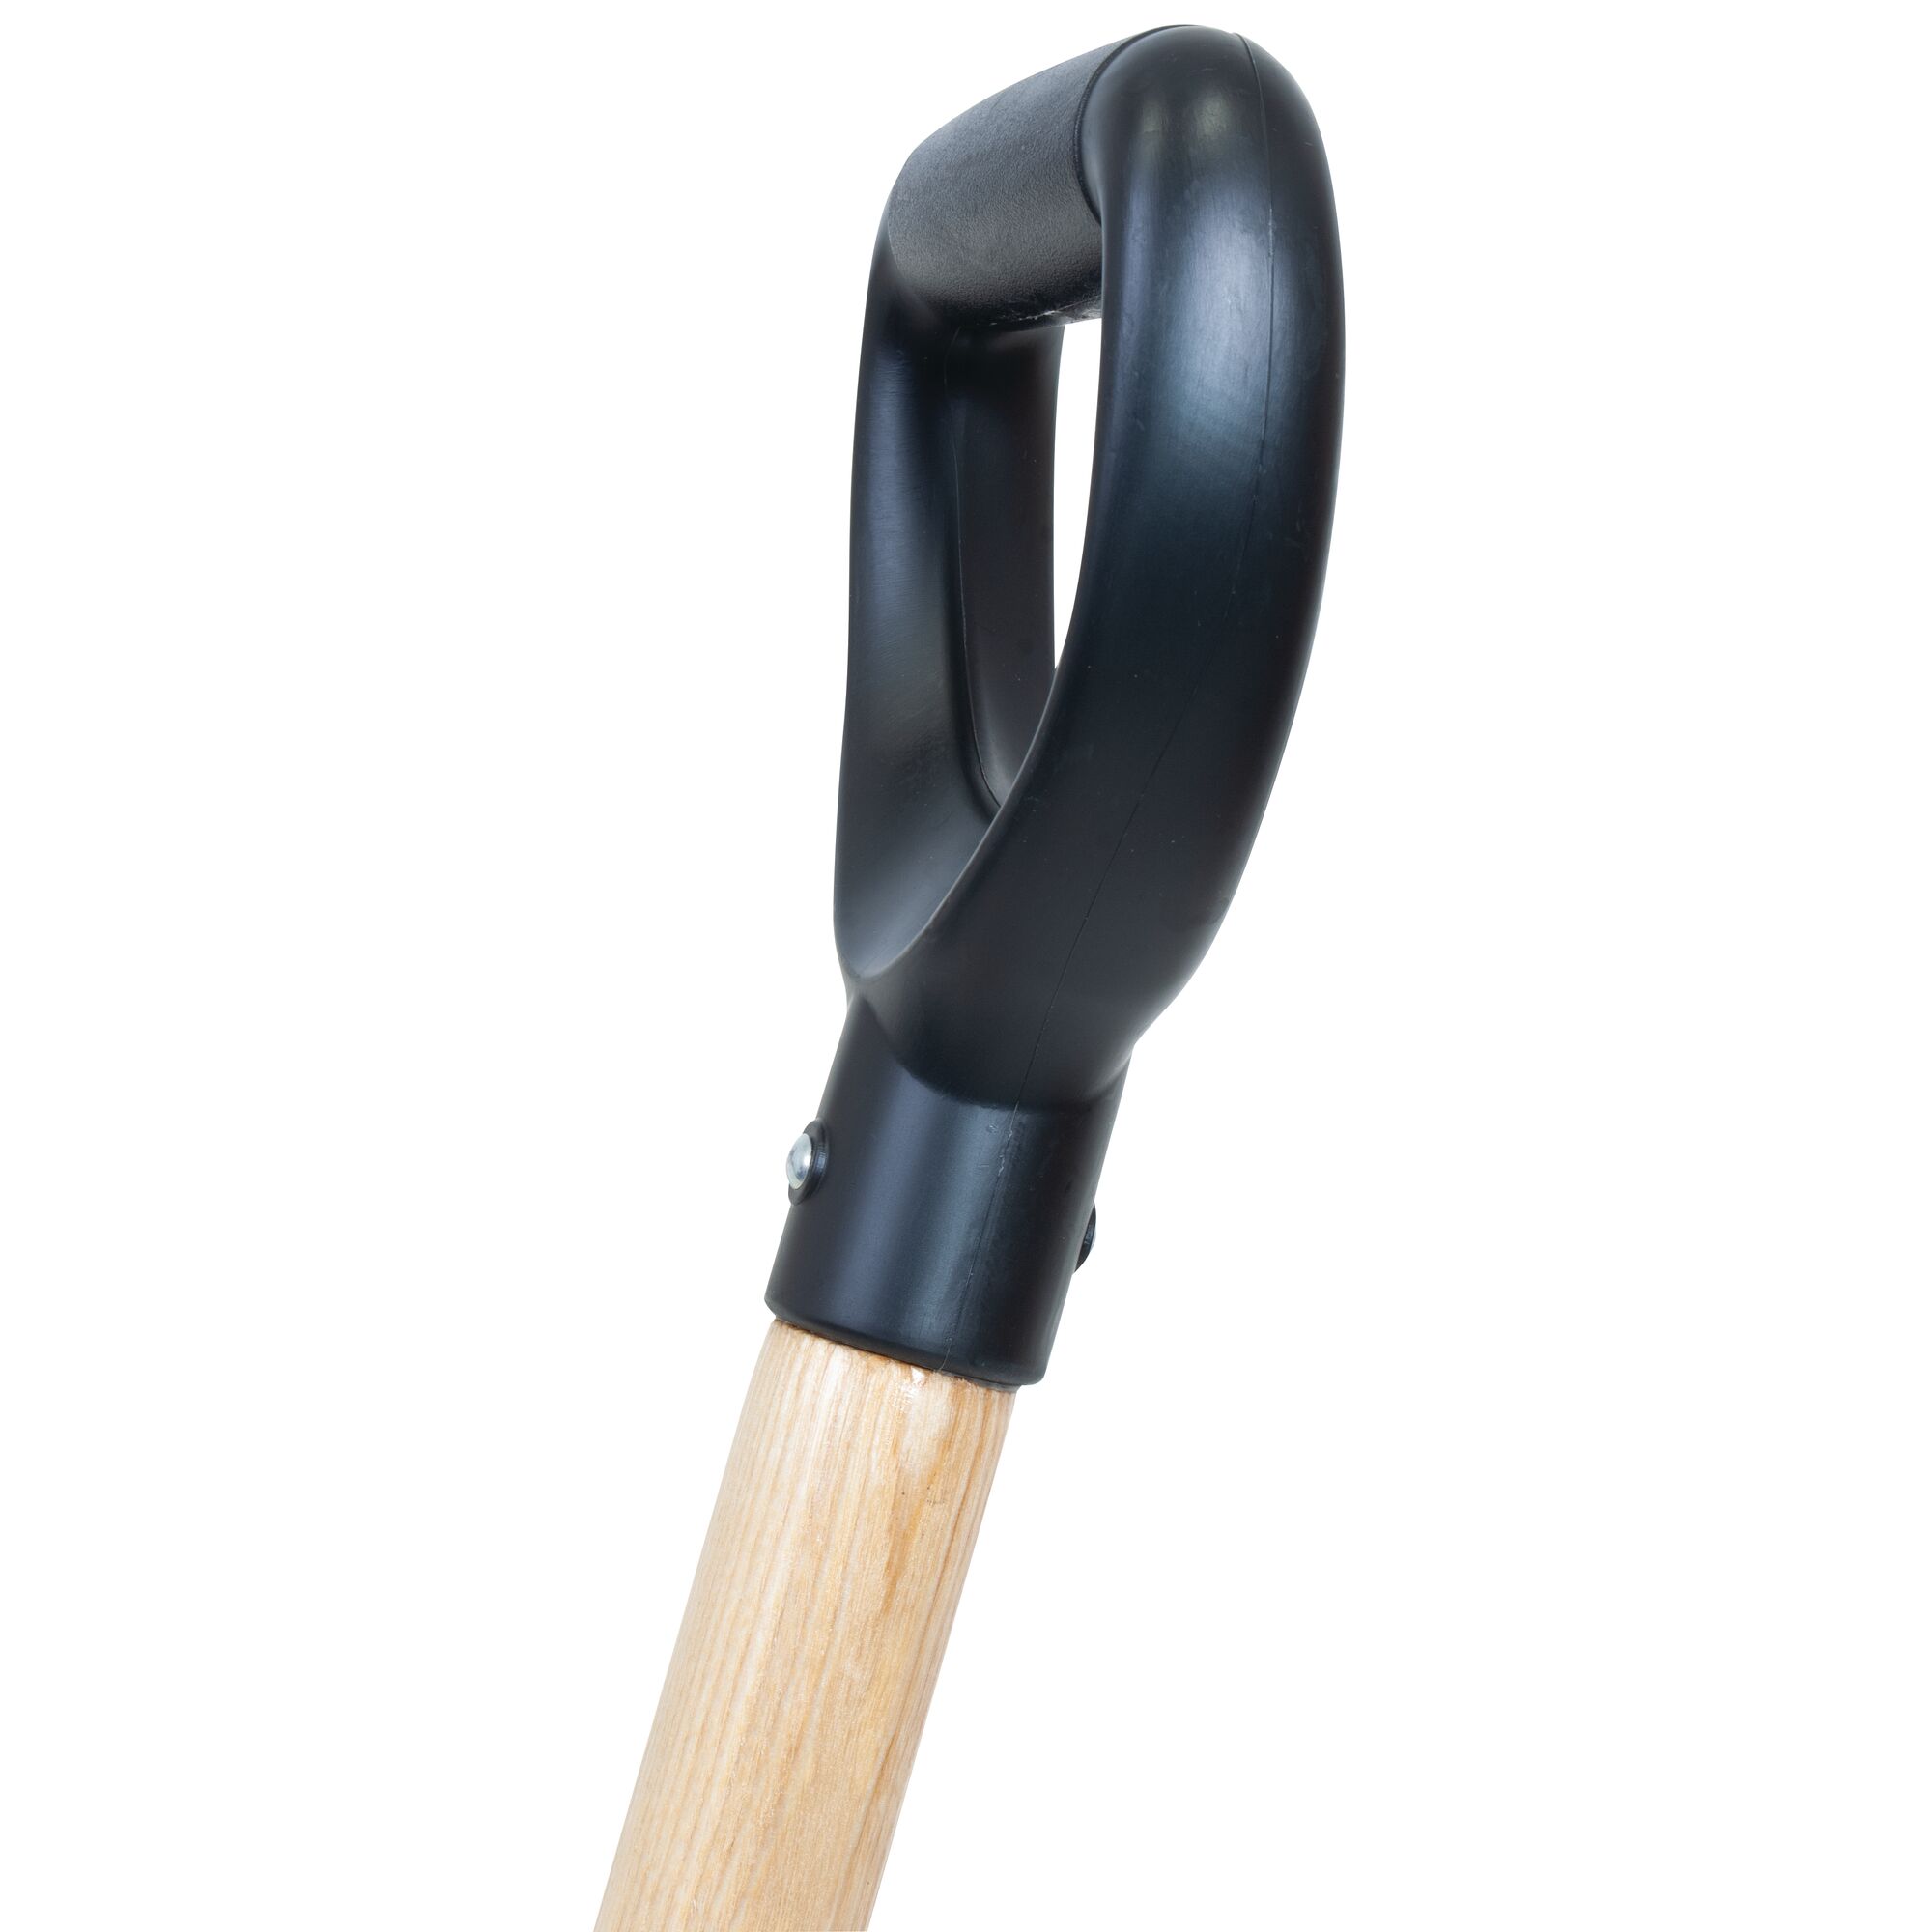 Comfortable grip handle feature of a wood handle transfer shovel.